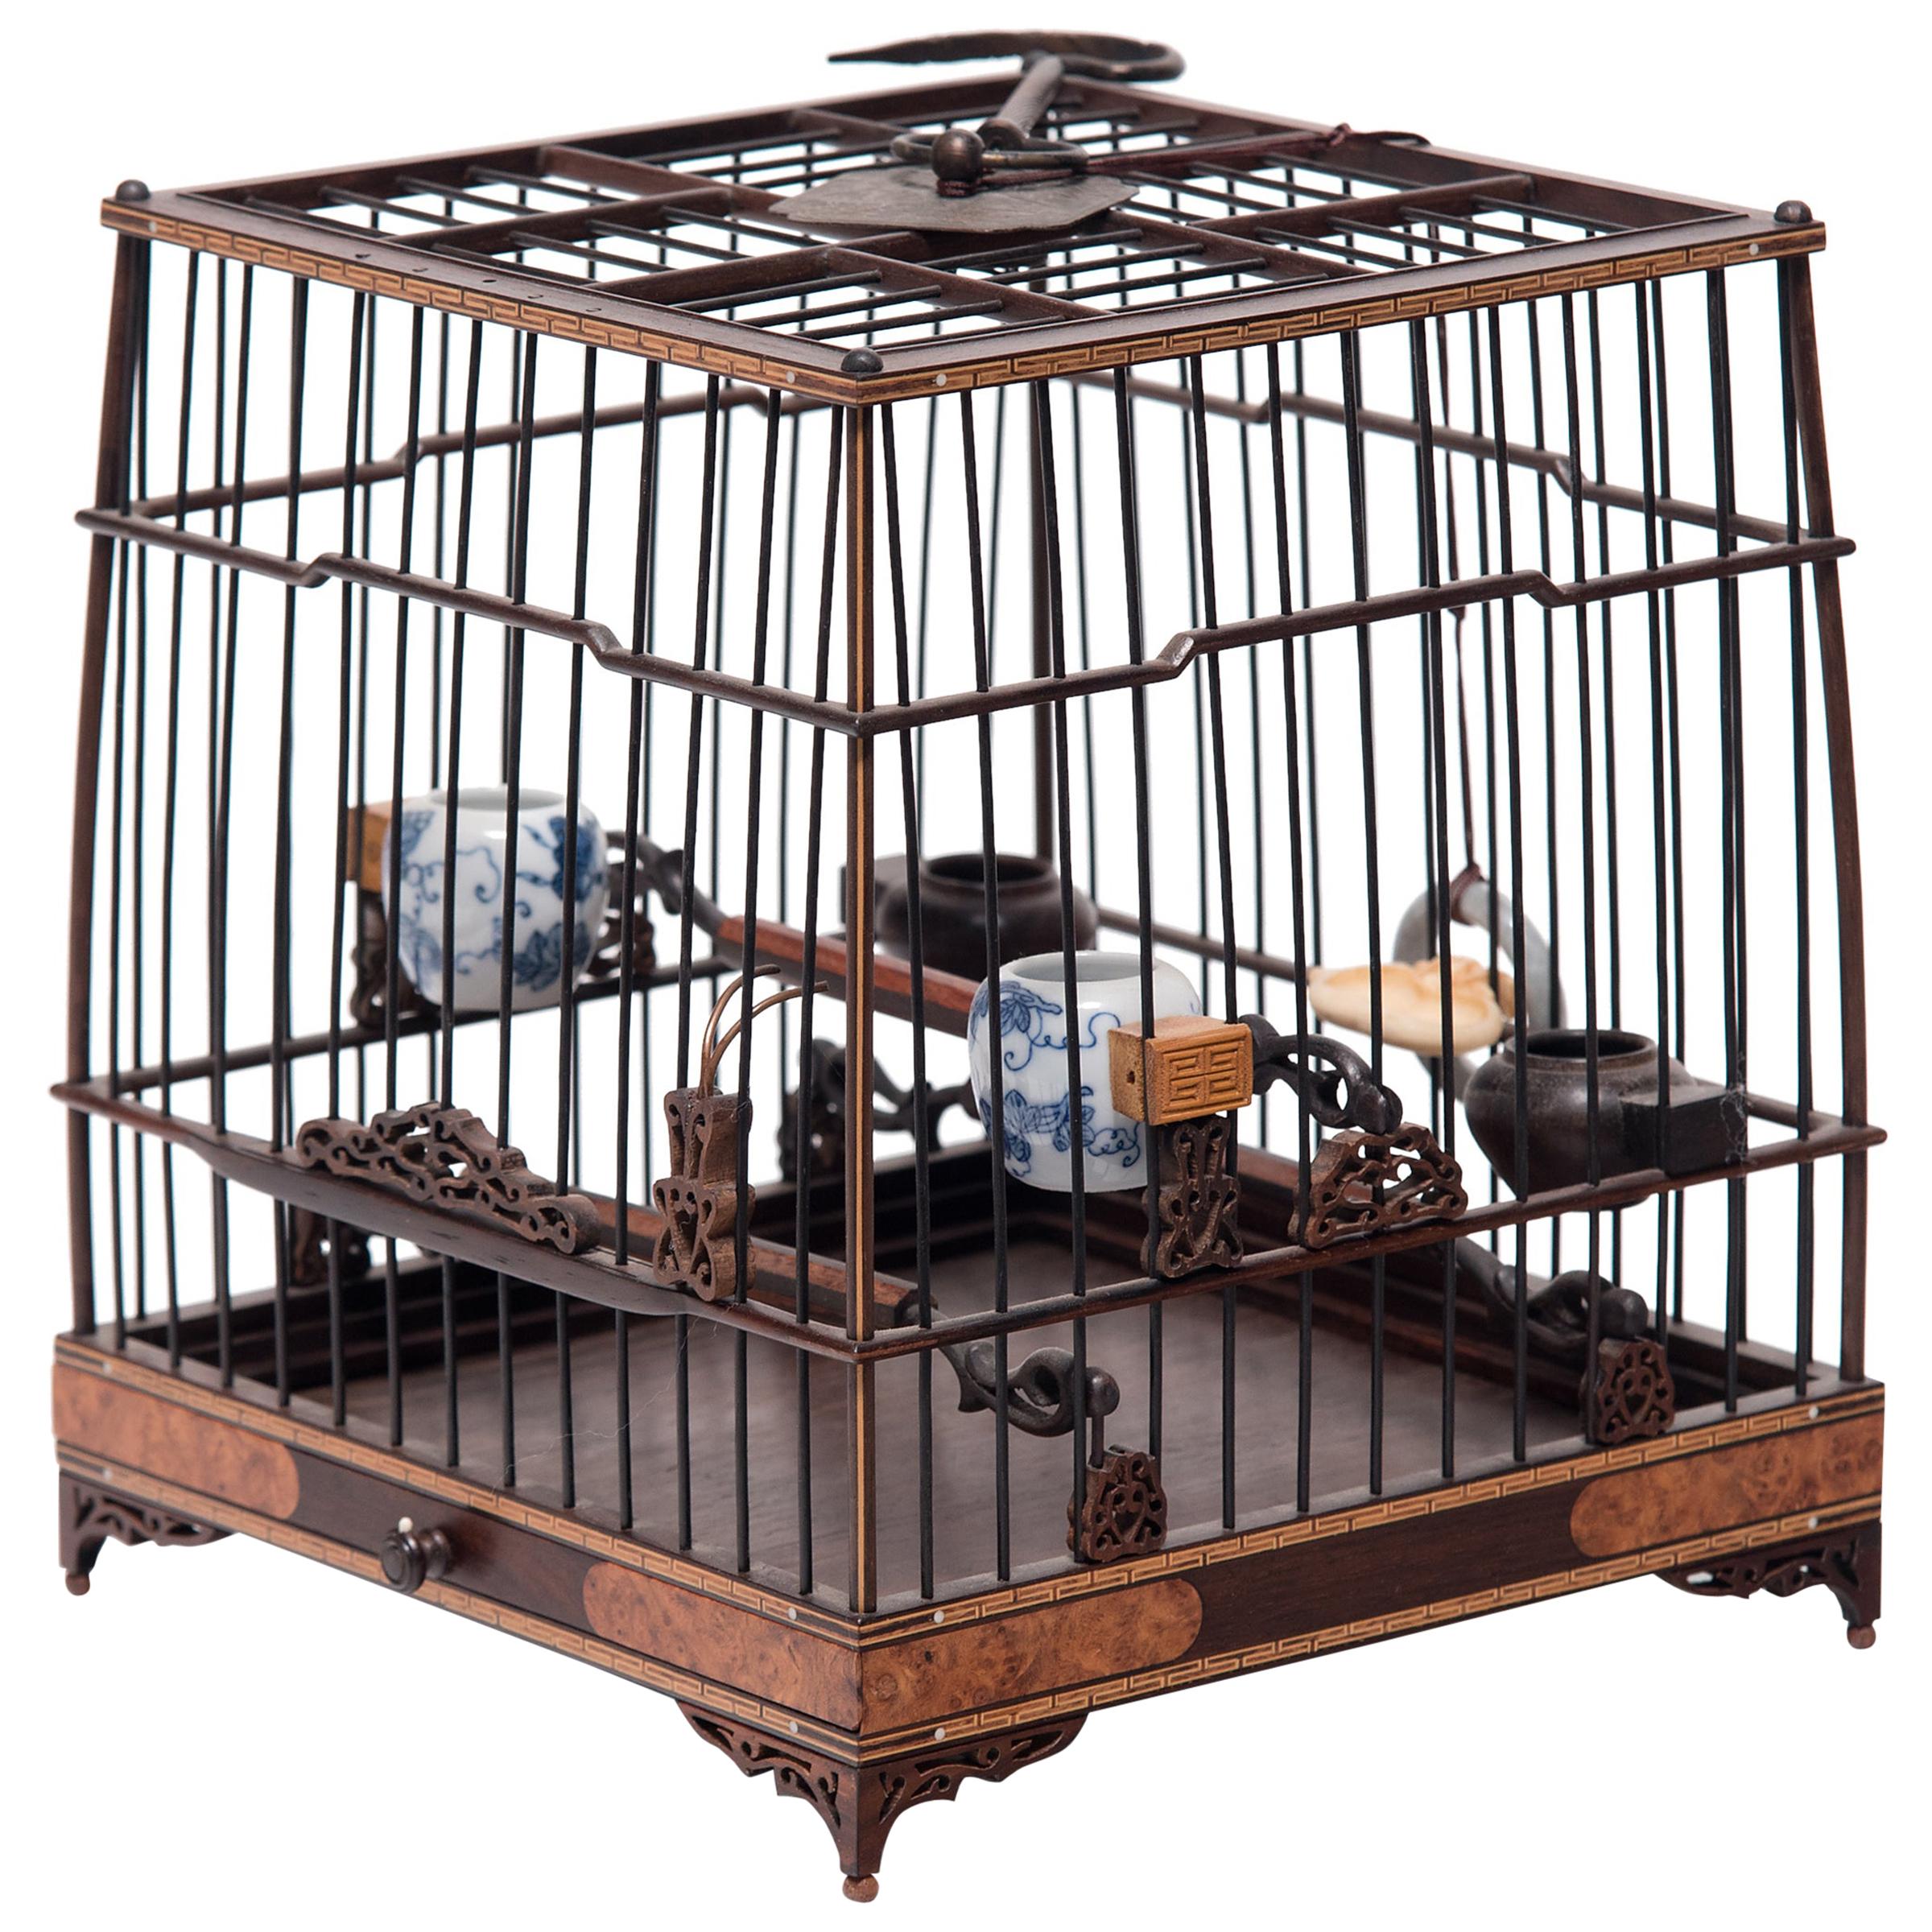 Chinese Square Birdcage with Burl Inlay, circa 1850